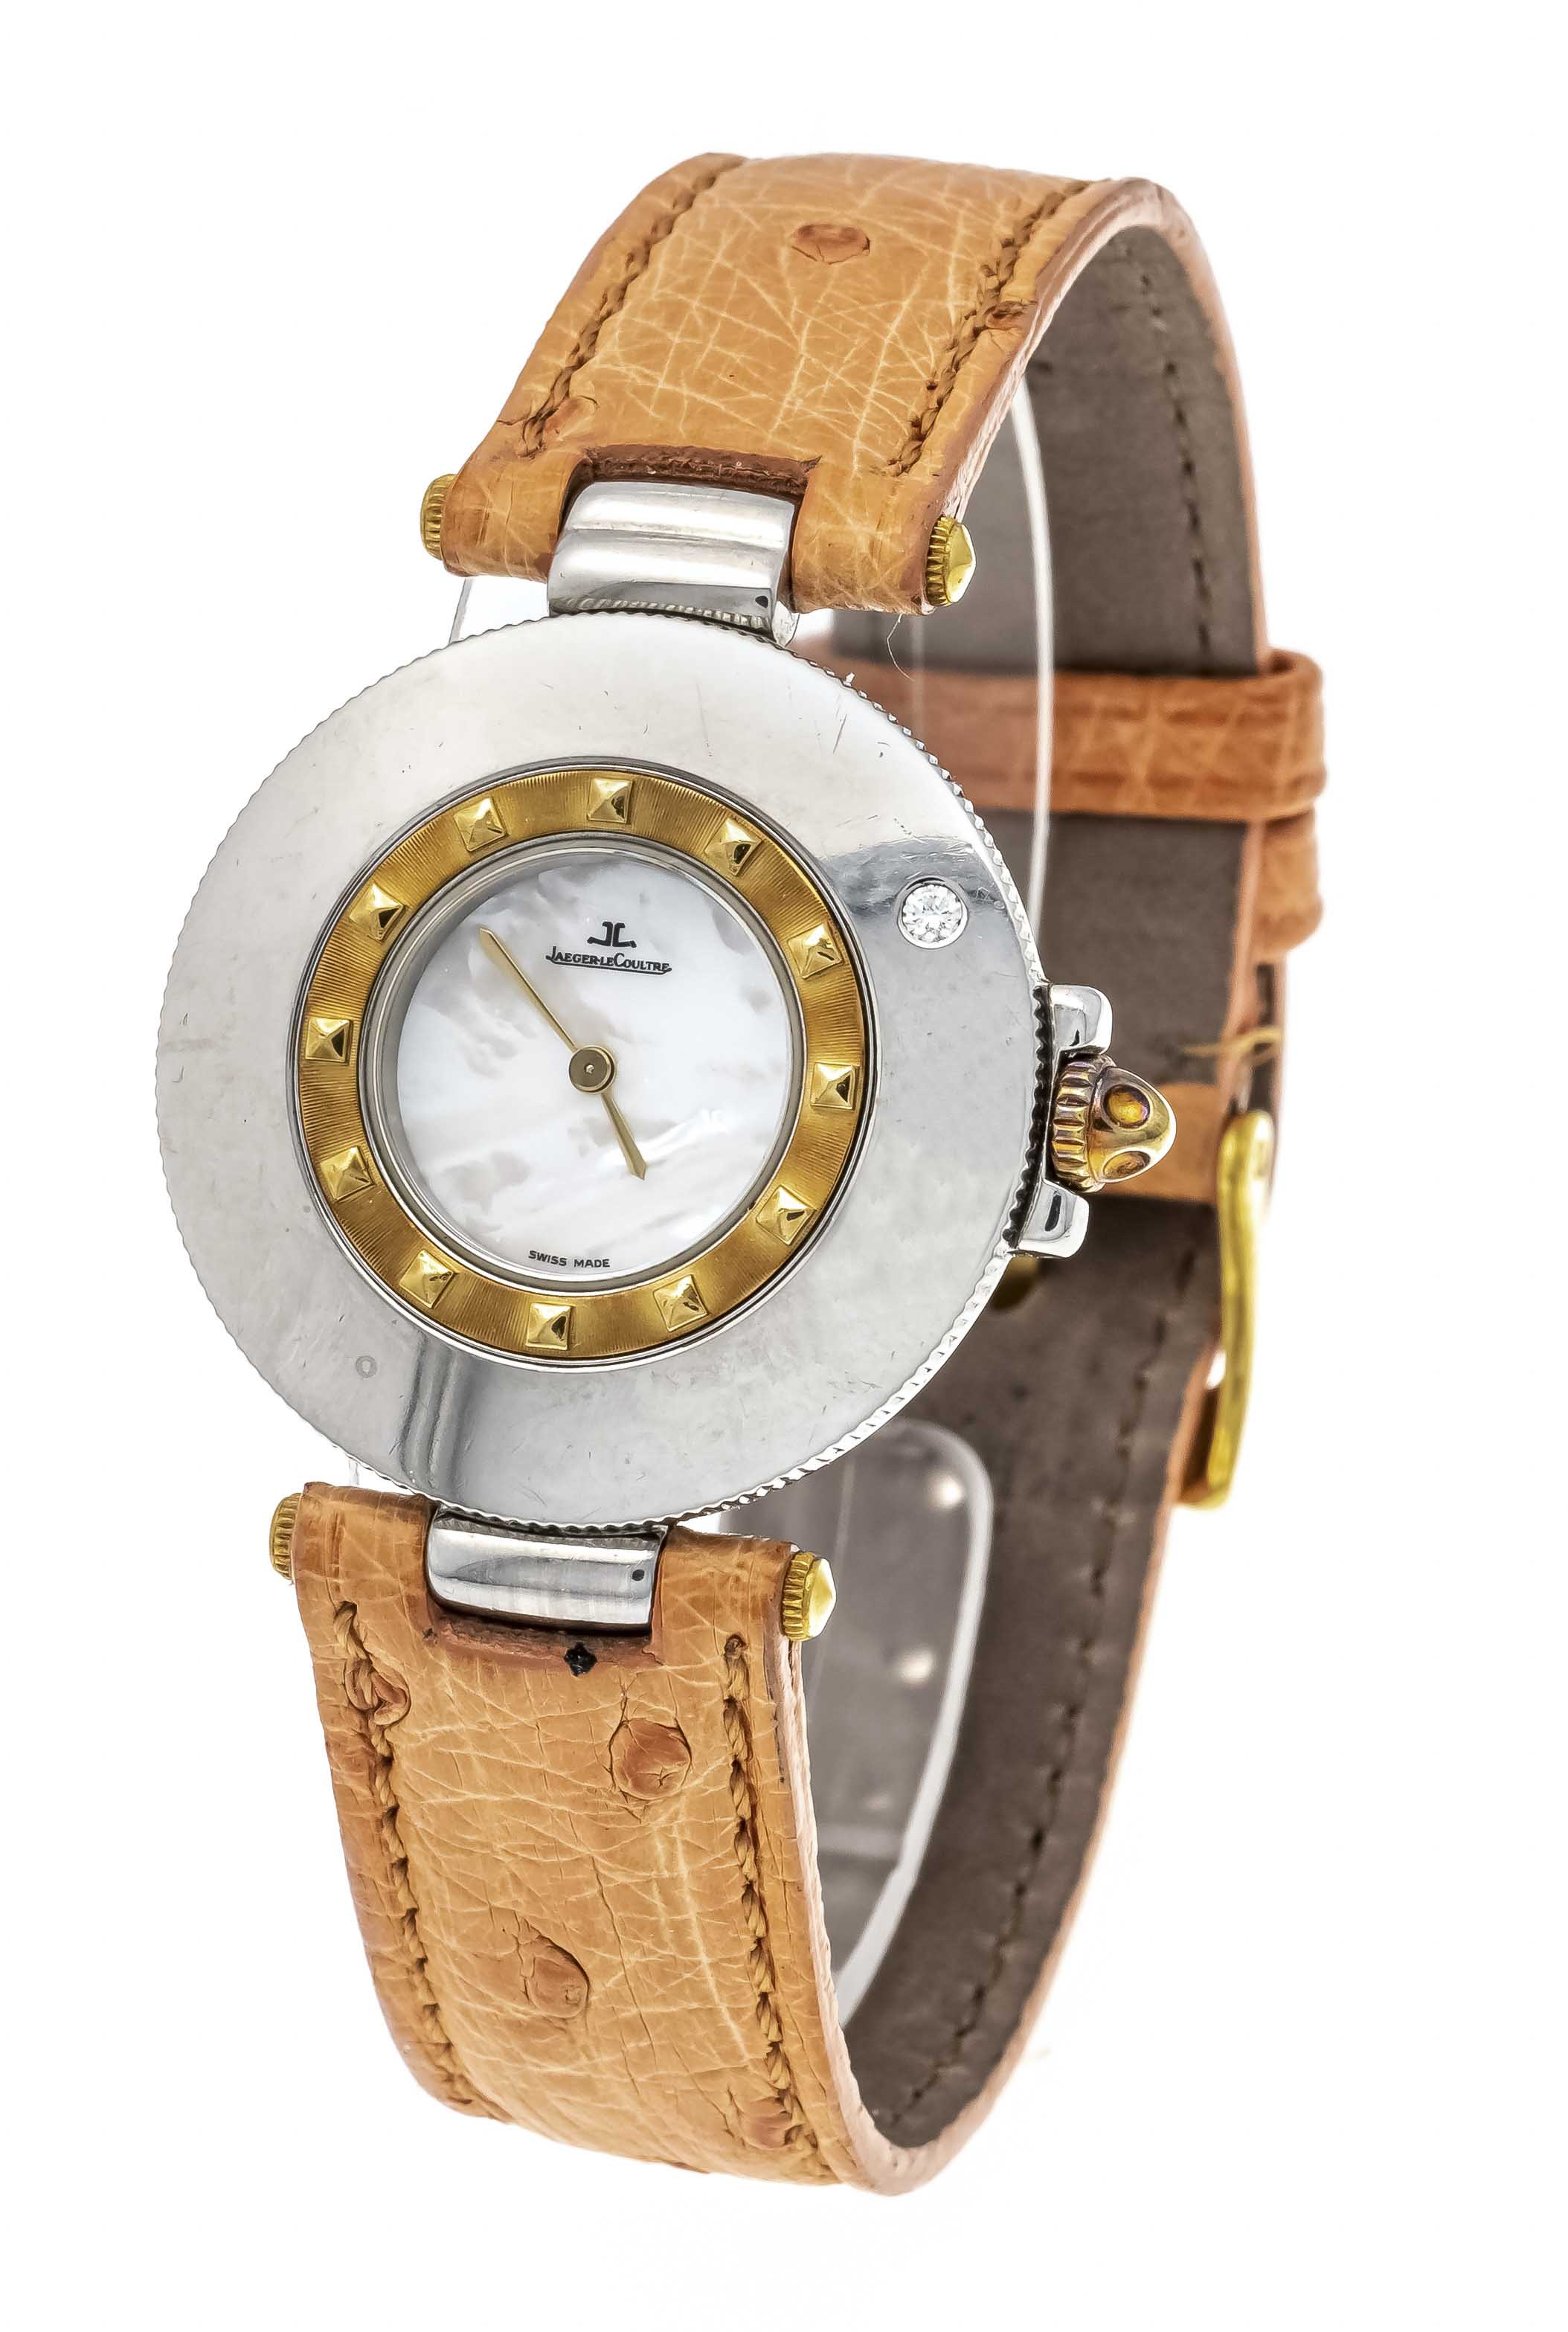 Jaeger-Le Coultre ladies' quartz watch, ref. 421.509, steel/gold 750/000 GG, from 1995, battery